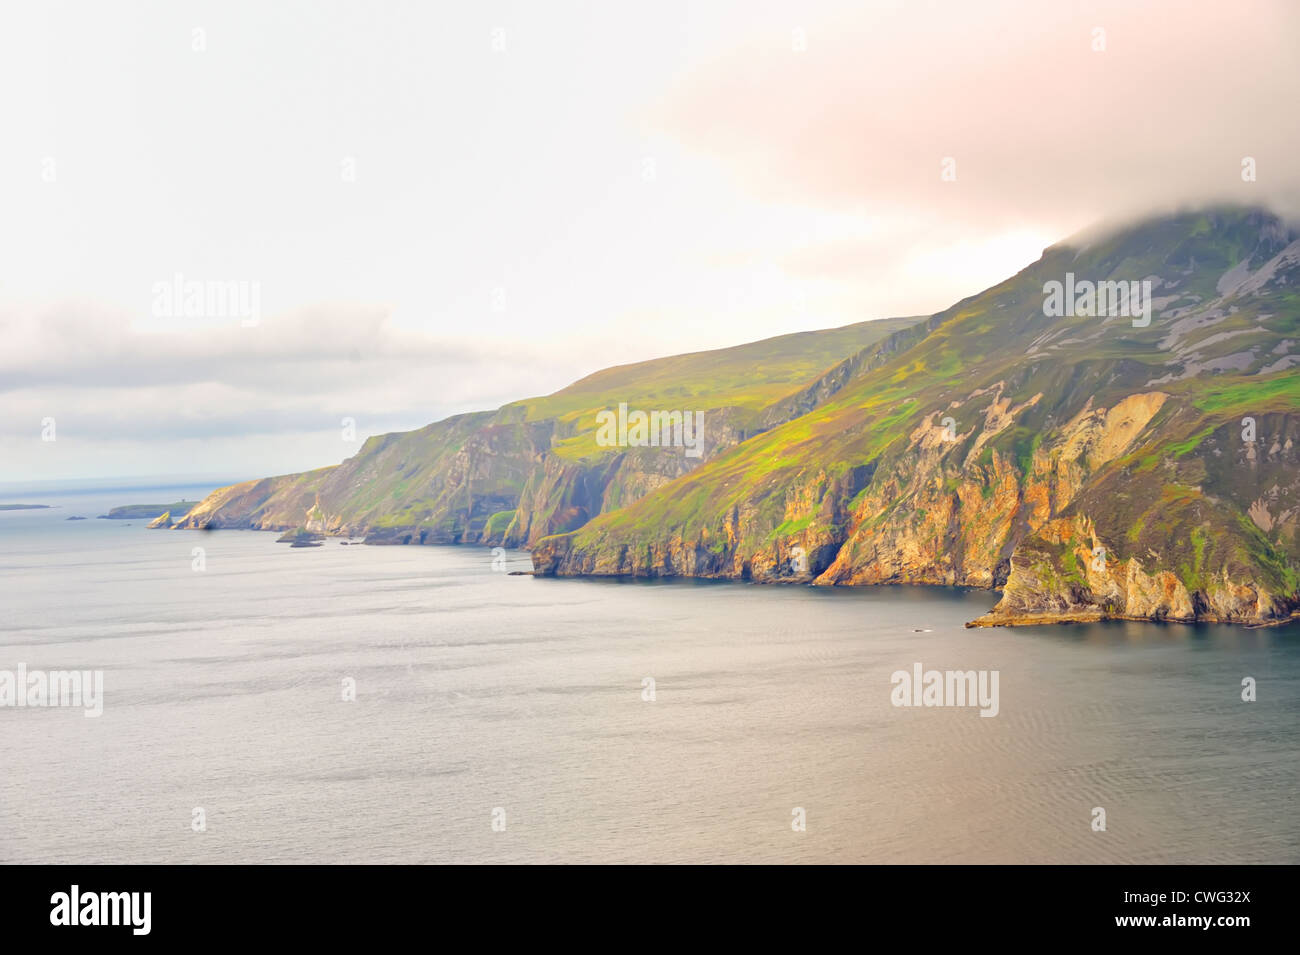 Cliffs of Slieve in County Donegal, Ireland Stock Photo